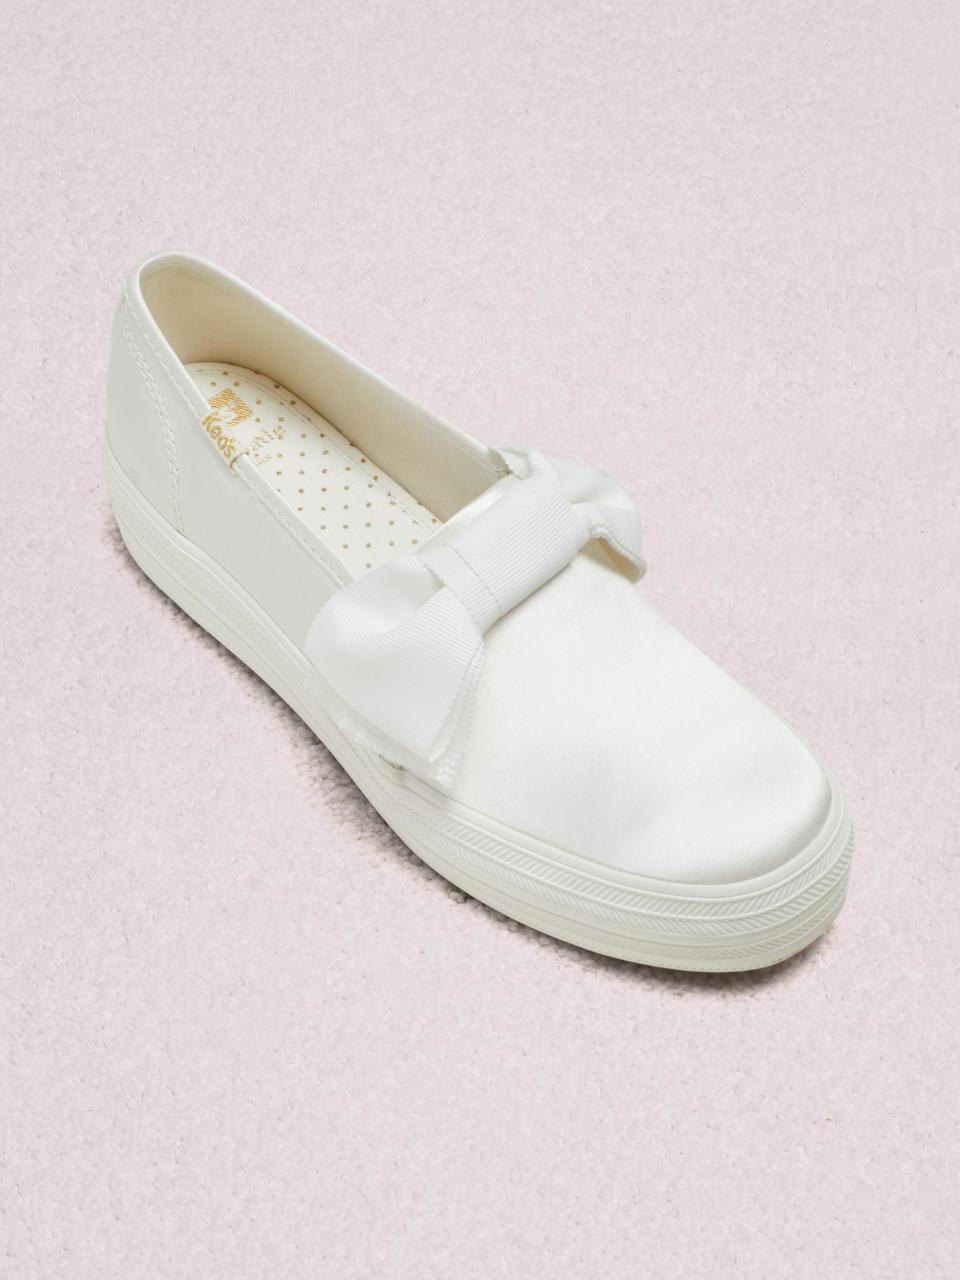 Bow sneakers by Keds x Kate Spade (Kate Spade)